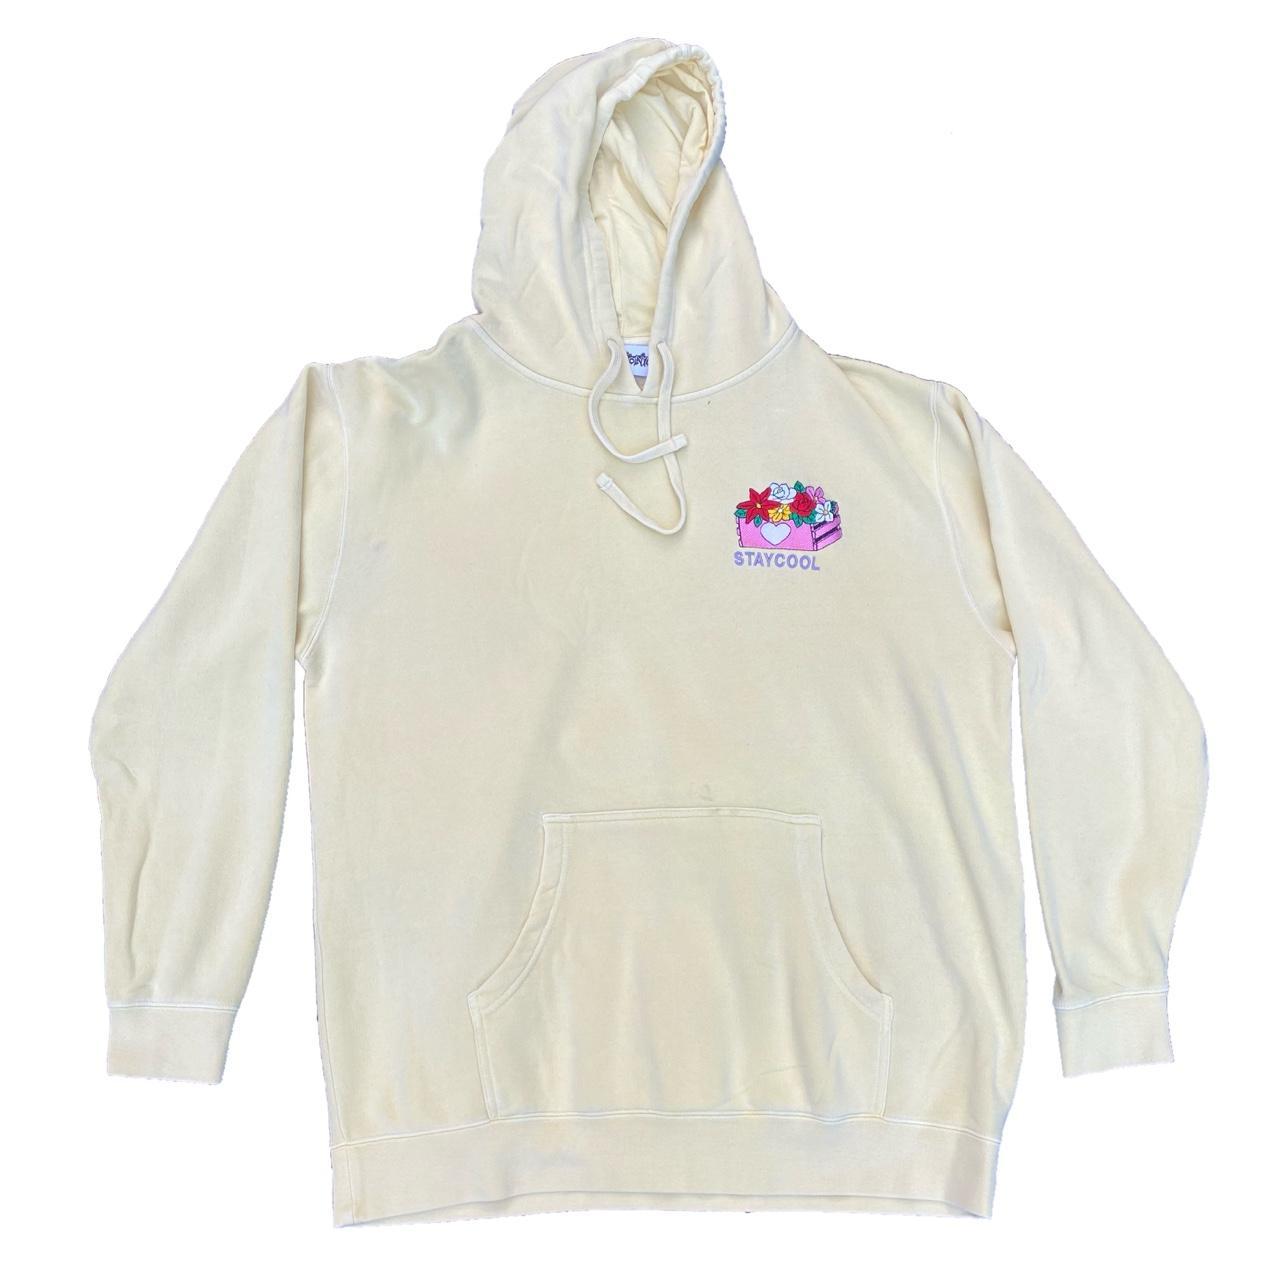 STAY COOL NYC Men's Yellow and Cream Hoodie